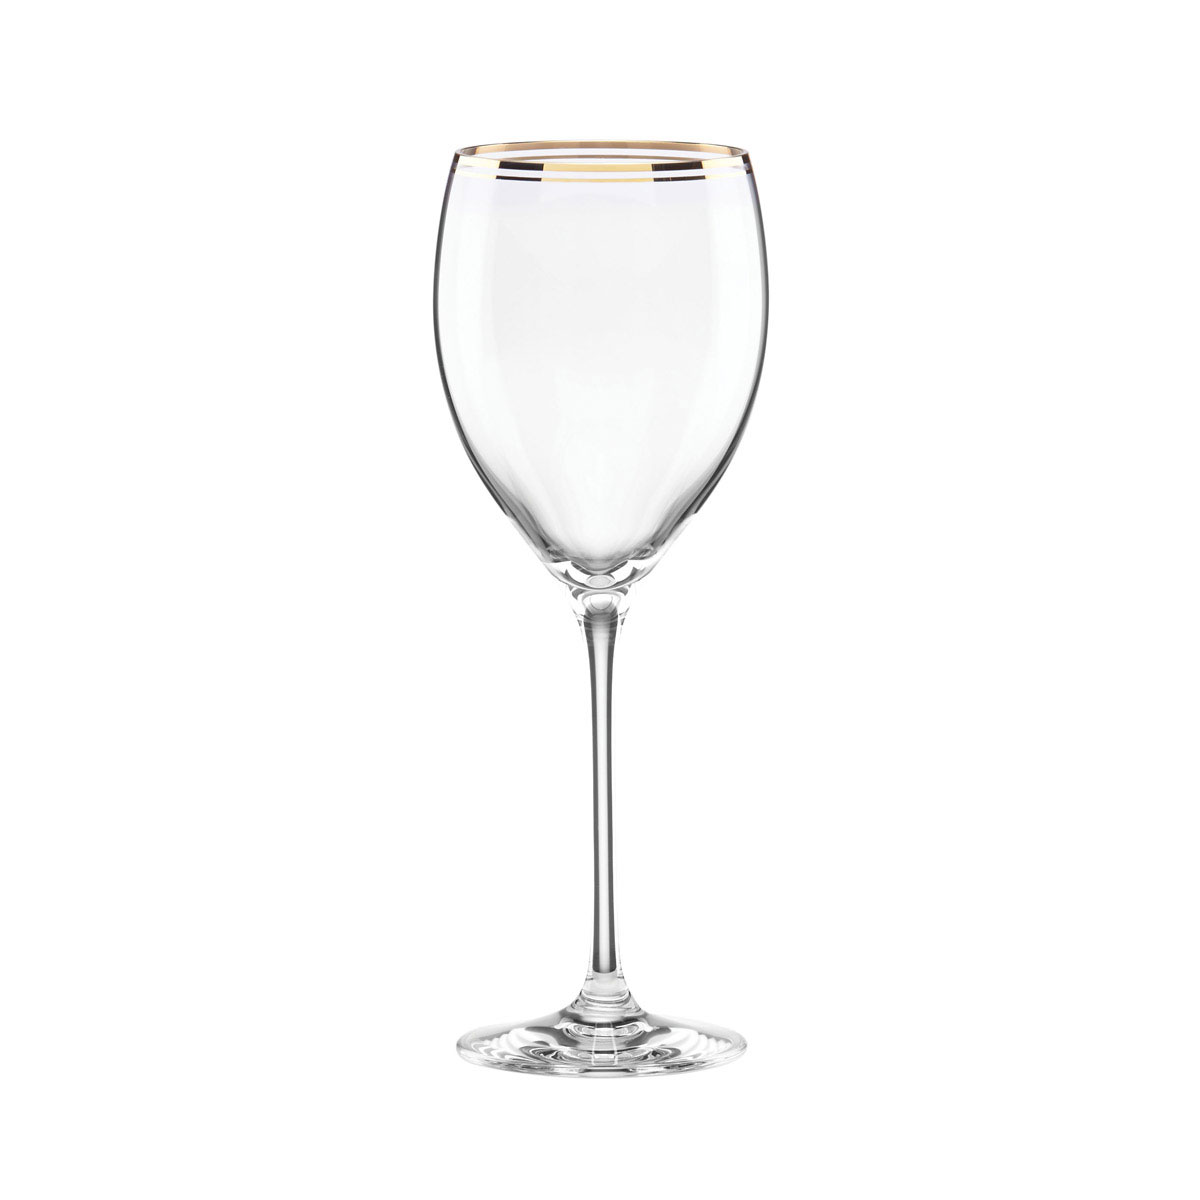 Kate Spade New York, Lenox Orleans Square Gold Crystal Wine, Single